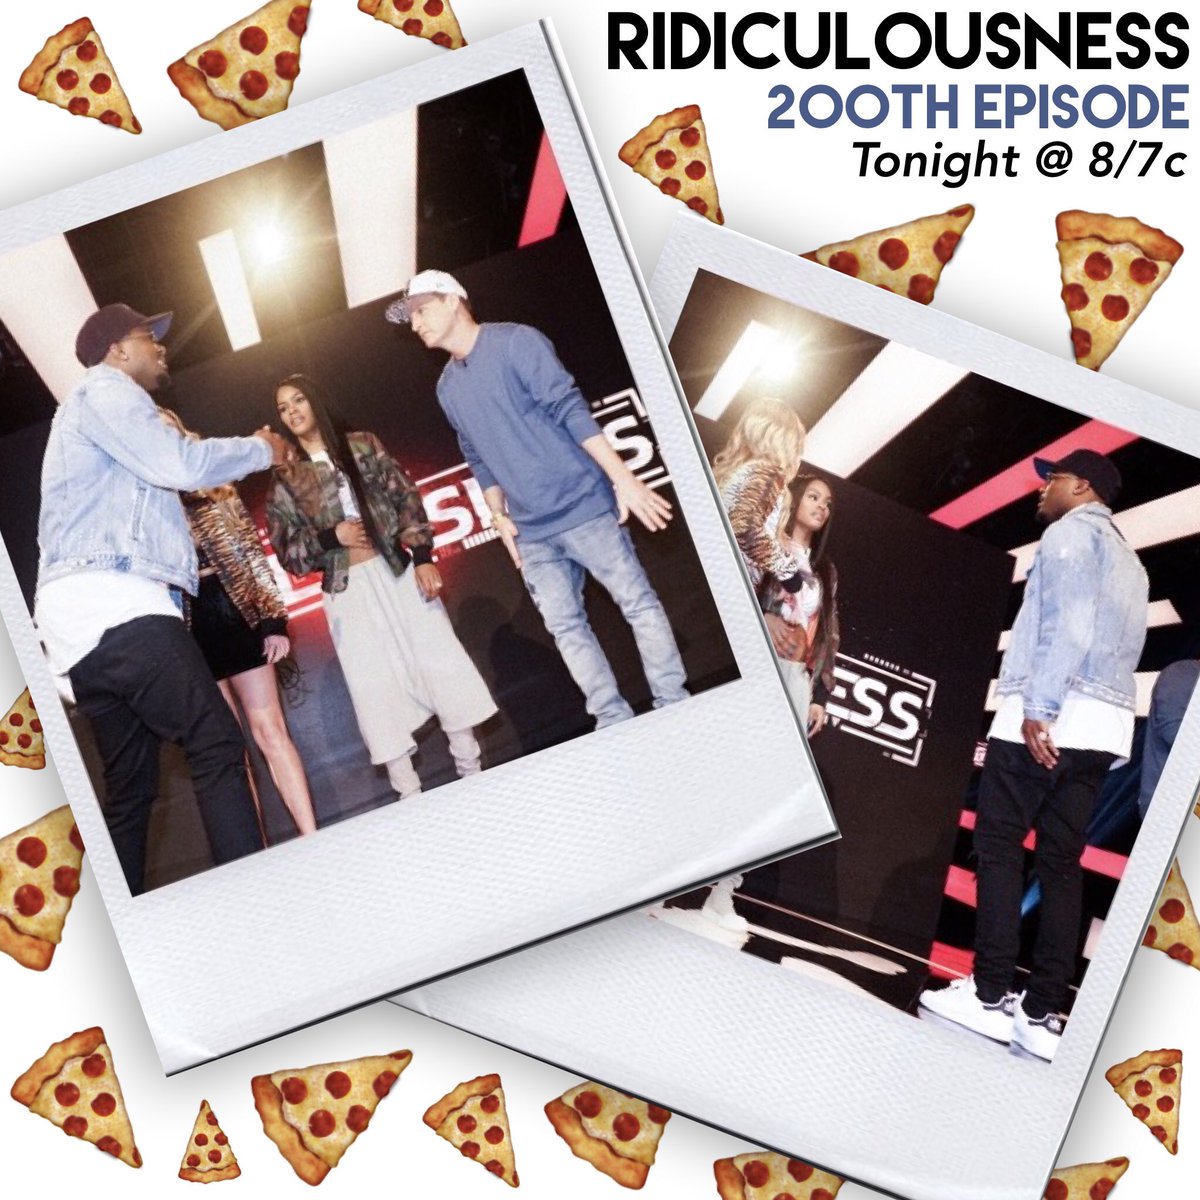 RT @Ridiculousness: 200th episode of Ridiculousness ???? Catch us @ 8/7c for our biggest #RidicFridays yet ???????????????? https://t.co/UBA3CLyrlO